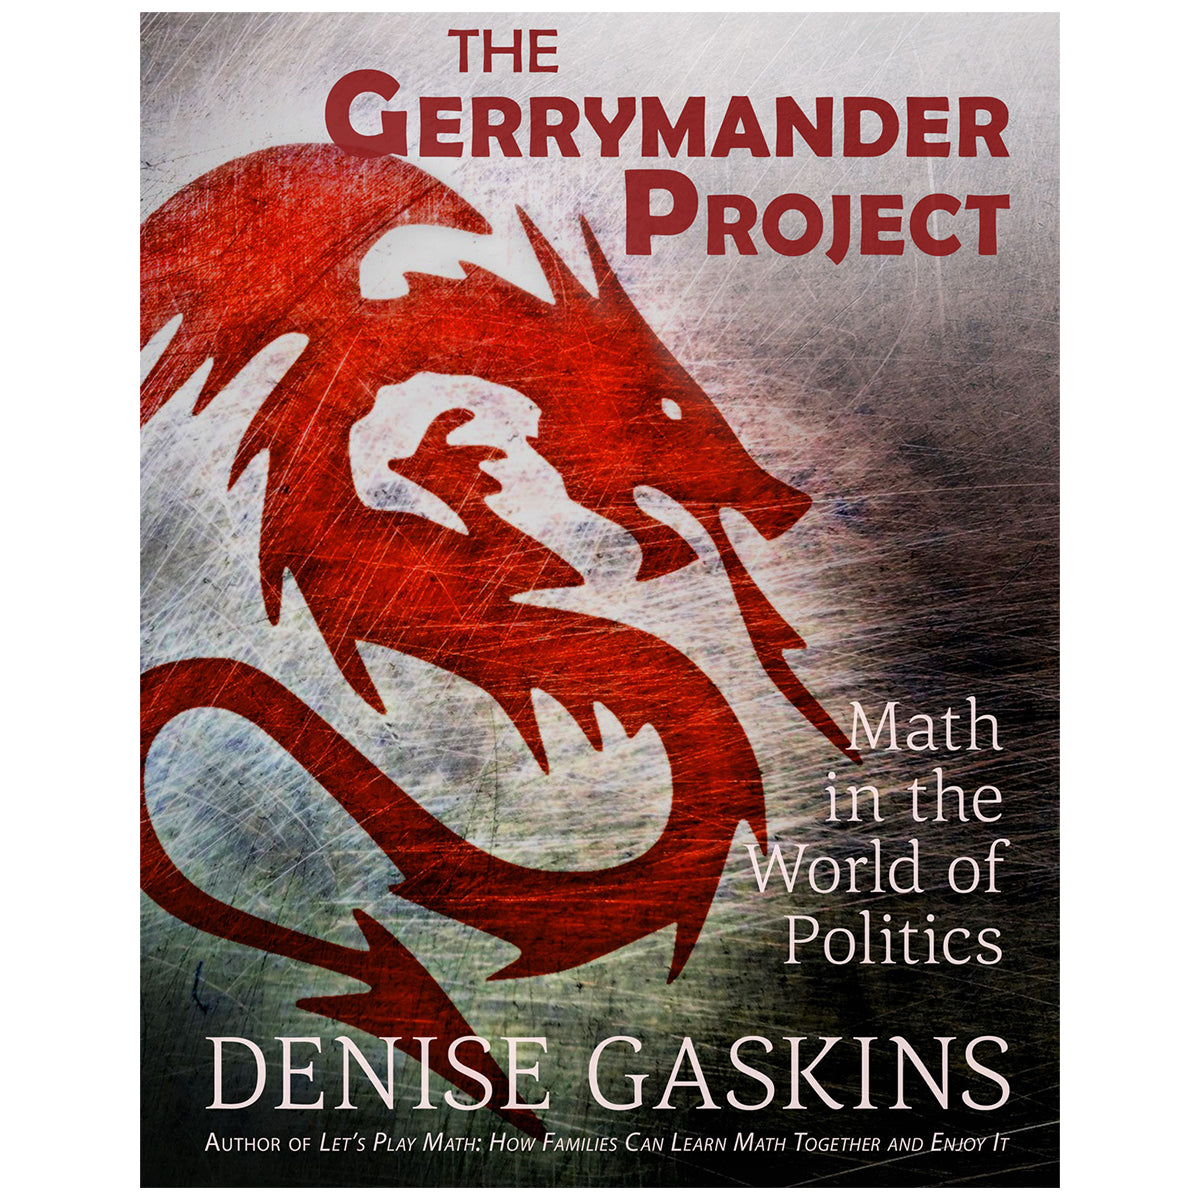 Gerrymander Project real-world printable math activity book by Denise Gaskins